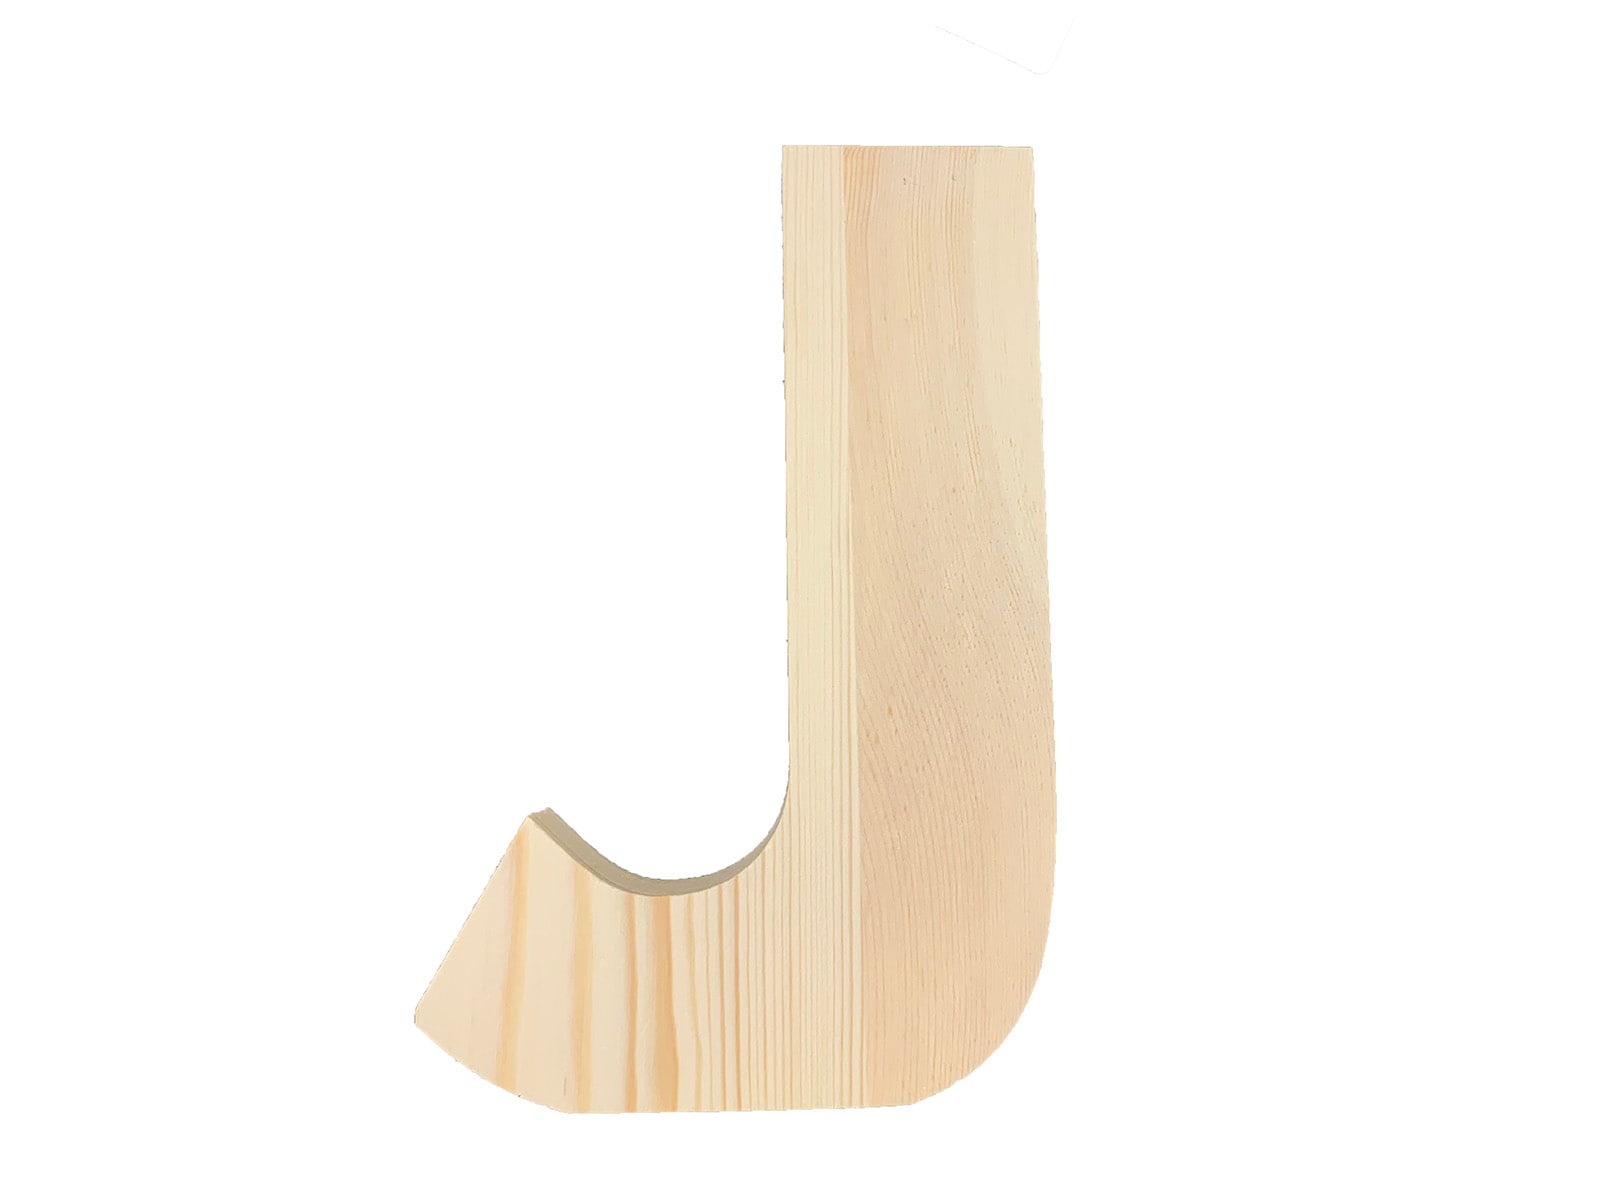 Hampton Art Wooden Letter J 8-in - Unfinished Pine Wood - DIY Craft  Supplies - Brown Color - Letter Cutout in the Craft Supplies department at